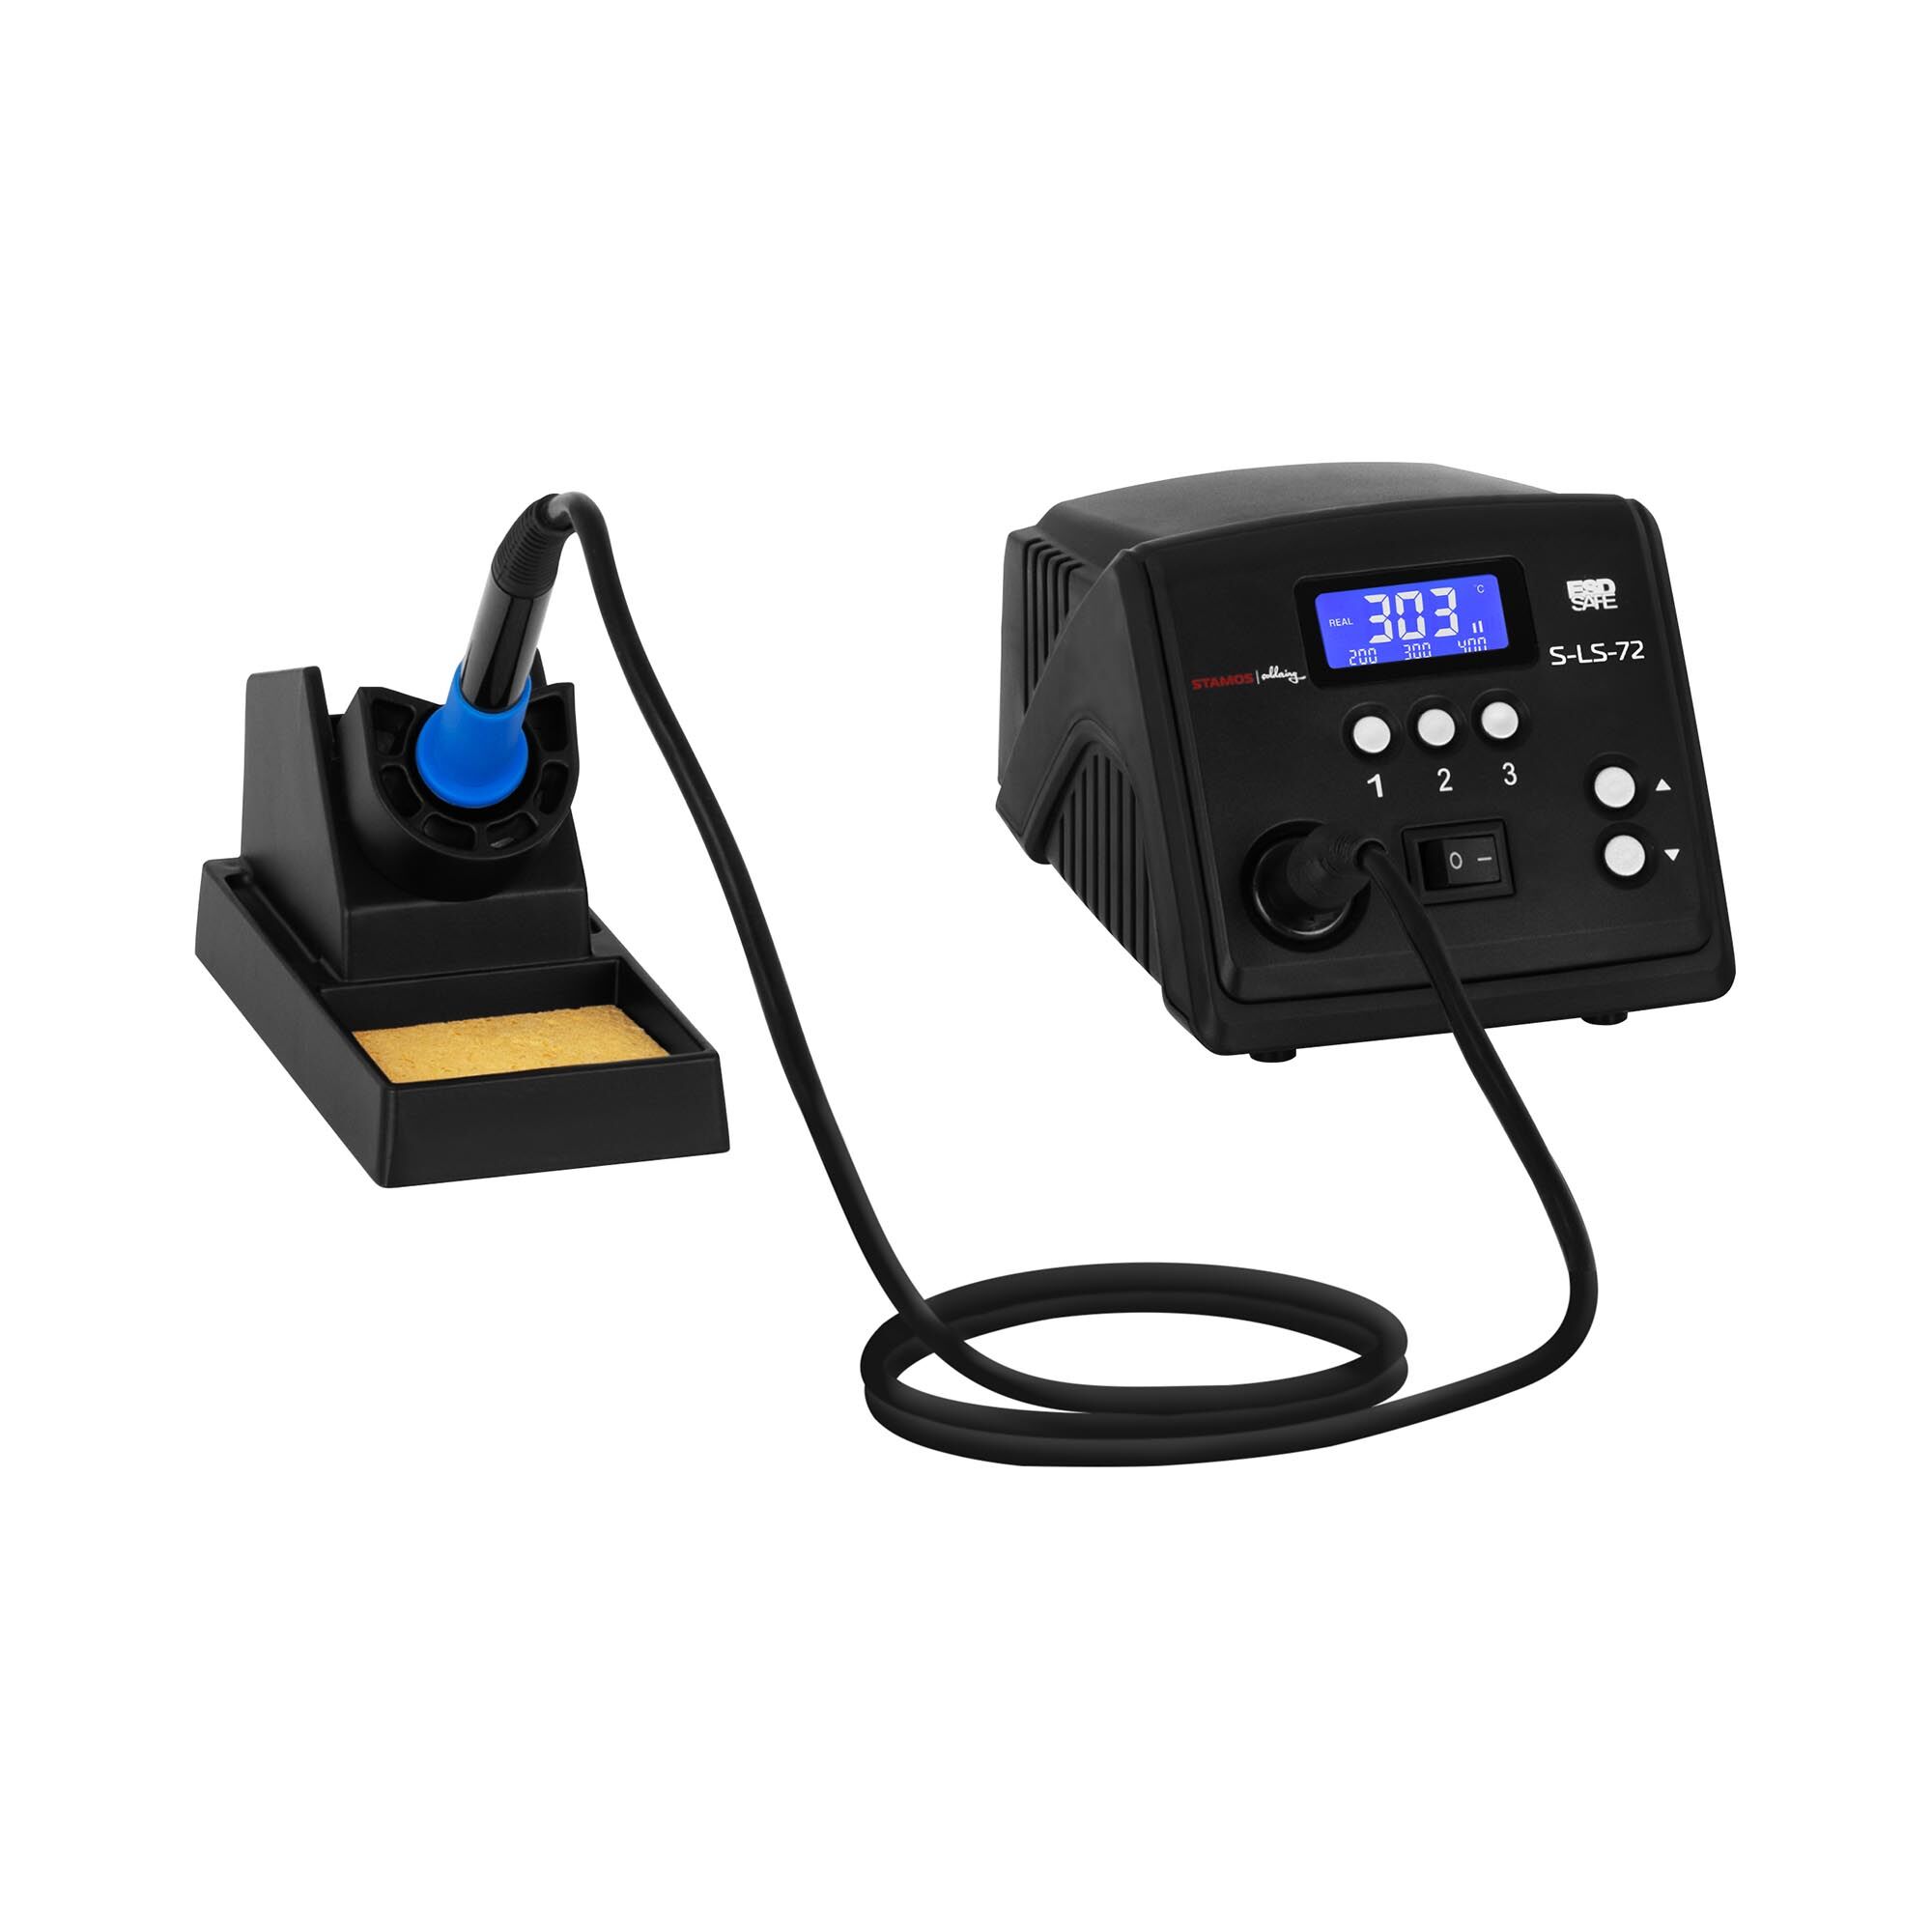 Stamos Soldering Soldering Station - digital - with soldering iron and holder - 90 W - LCD S-LS-72